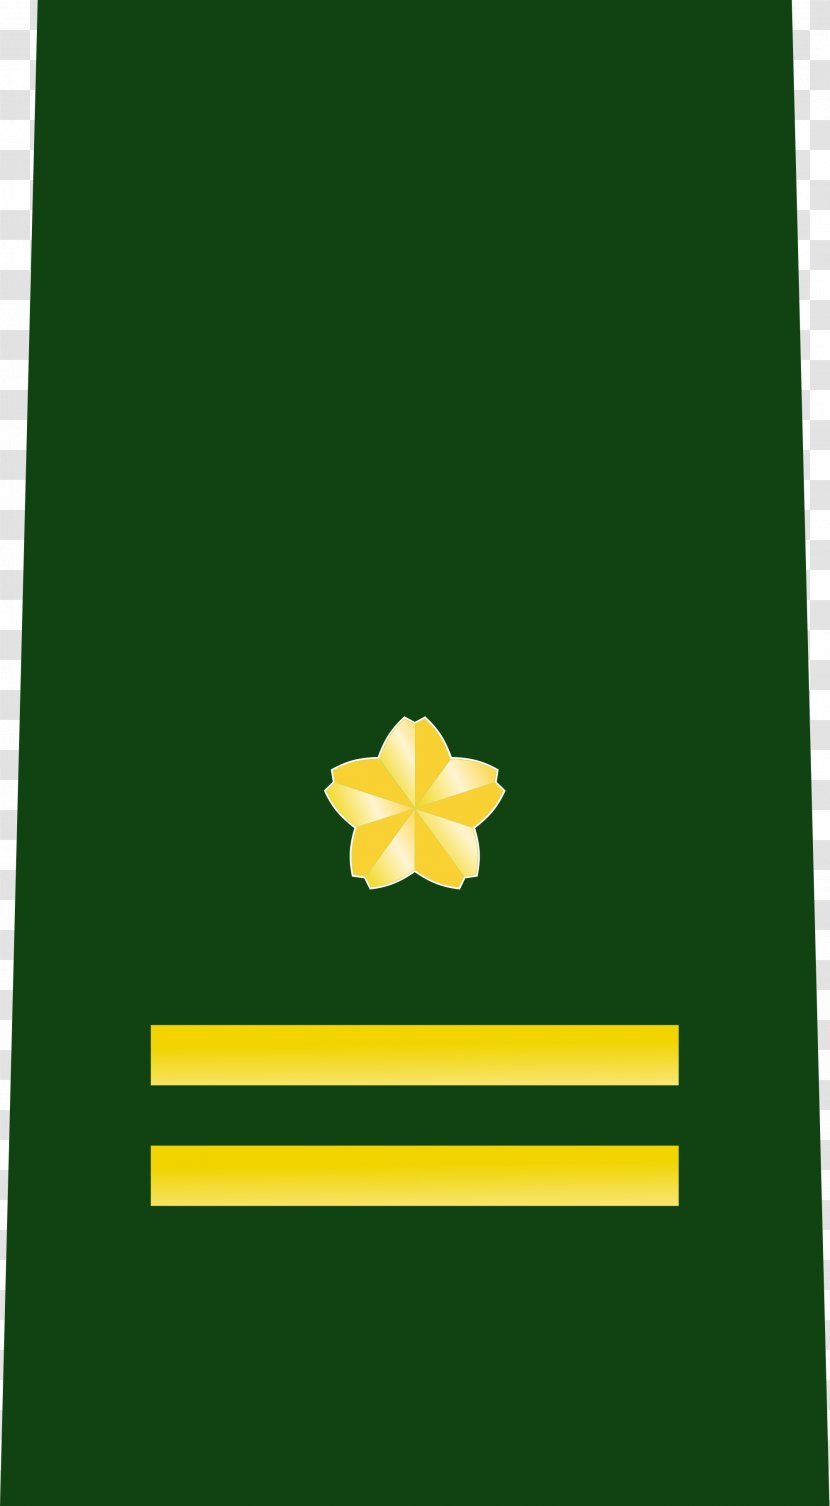 Major Japan Self-Defense Forces Army Officer Navy - Military Transparent PNG